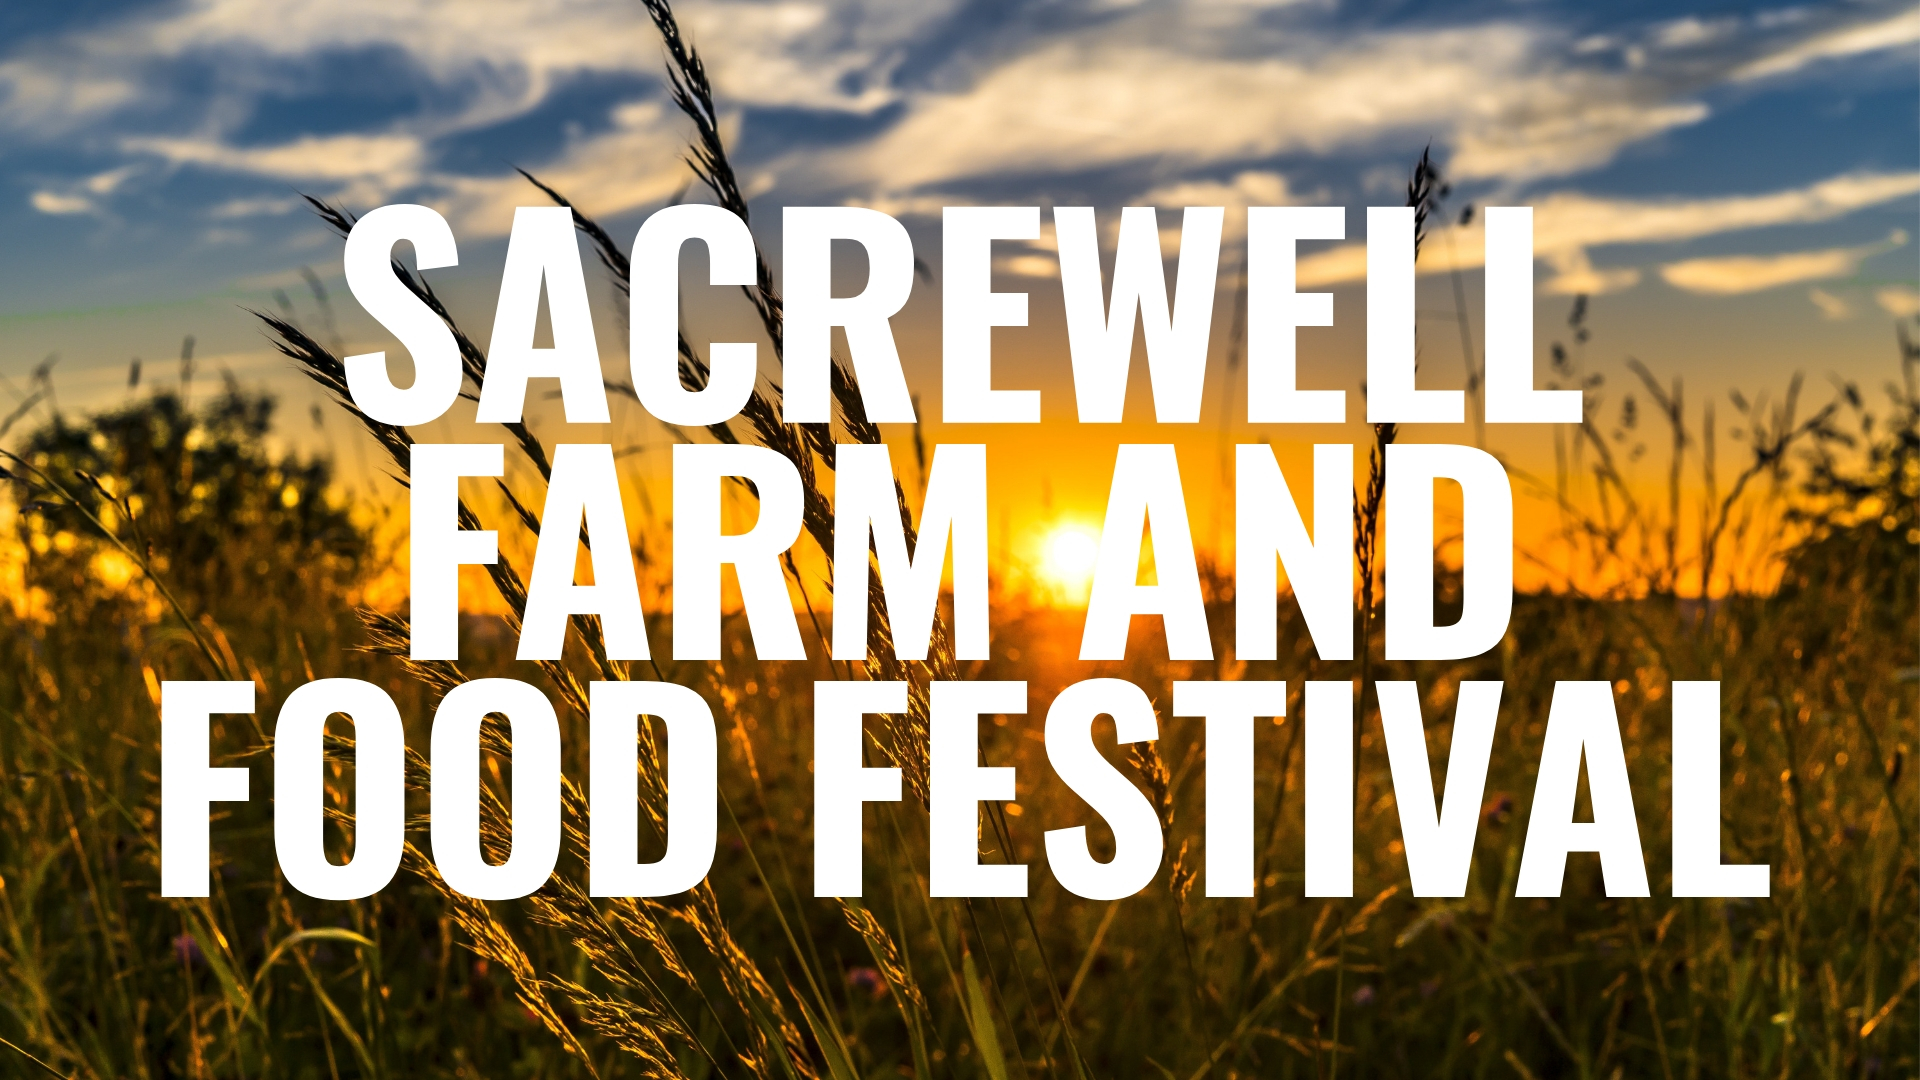 Copy-of-THE-GREAT-SACREWELL-FARM-AND-FOOD-FESTIVAL